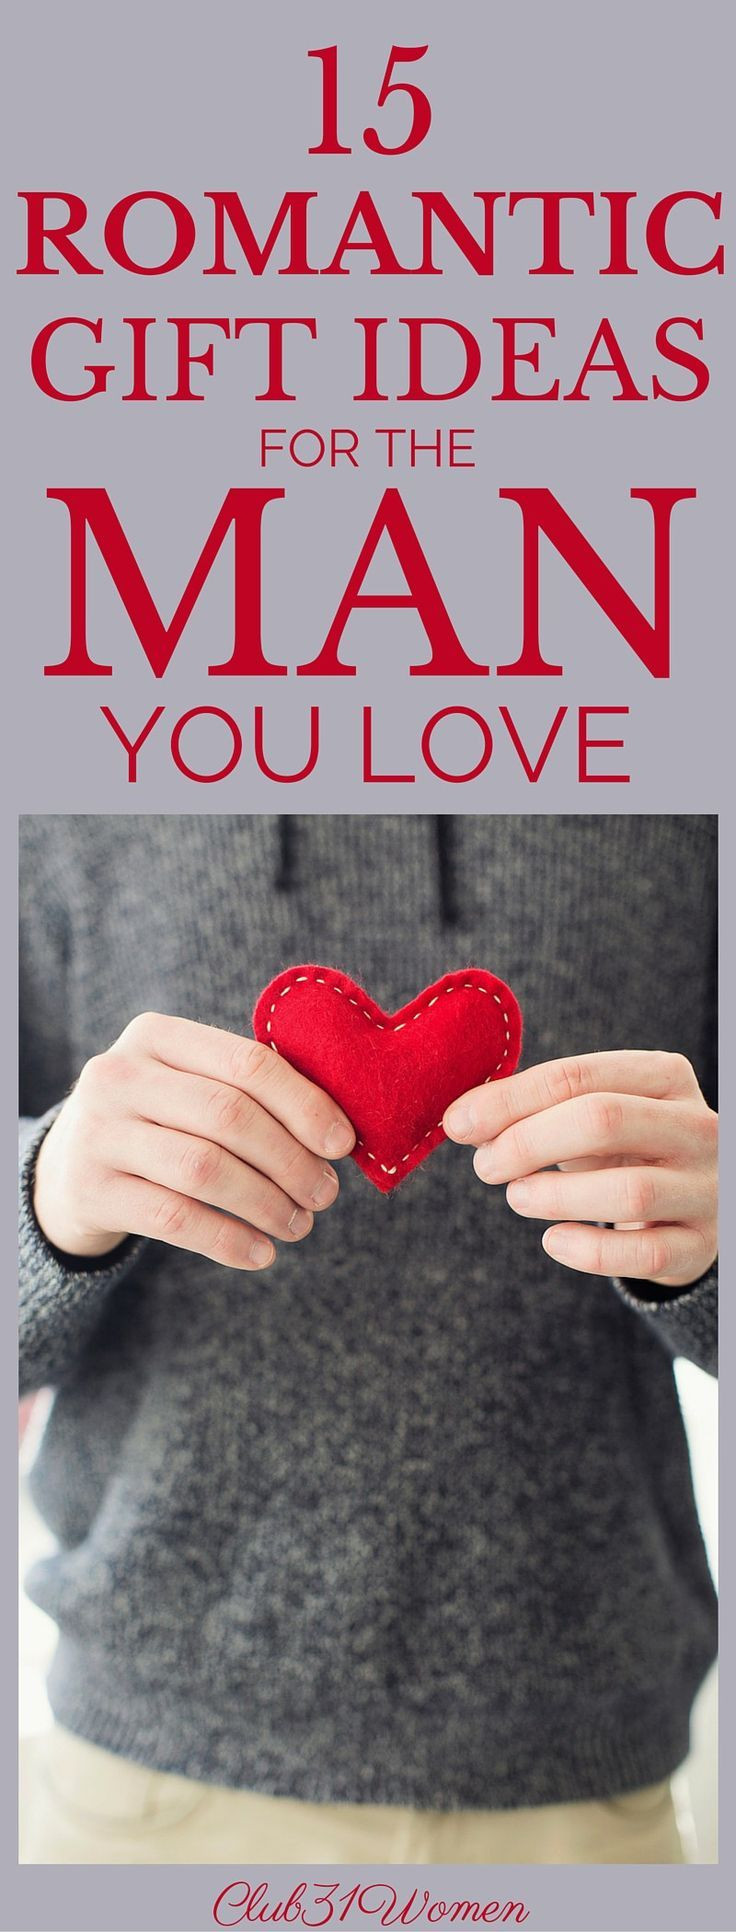 Romantic Gift Ideas For Him Valentines Day
 15 Surprisingly Romantic Gift Ideas for The Man You Love